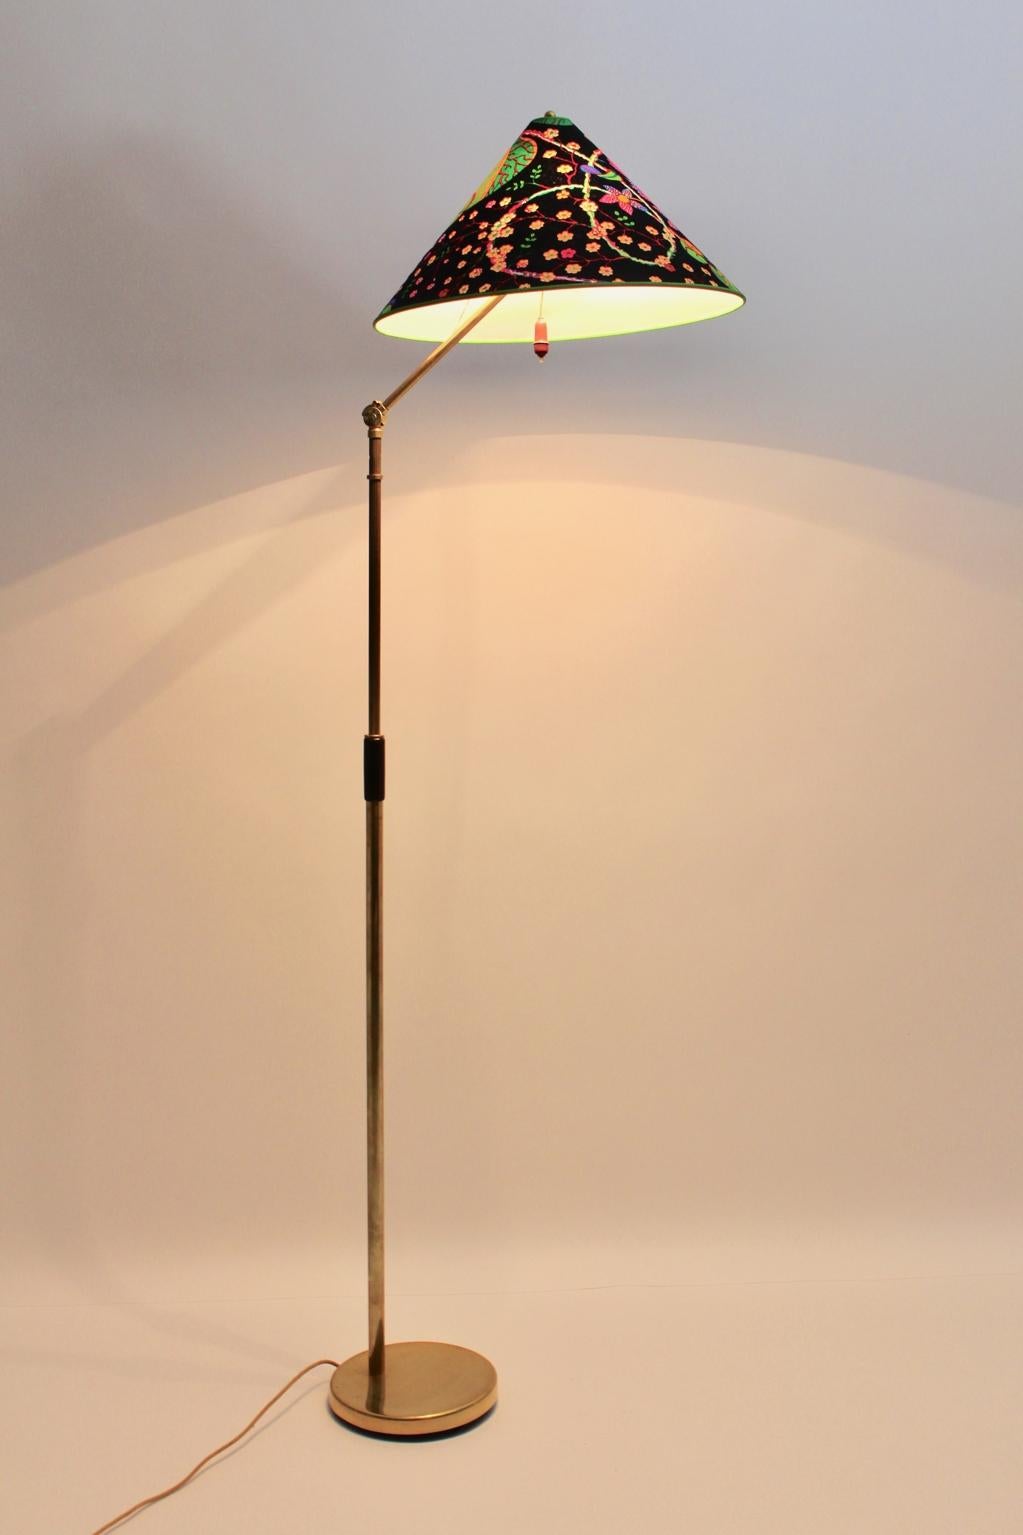 Art Deco Era floor lamp by Kaspar & Sic Kunstgewerbe Werkstätten für Metallarbeiten, Vienna, 1932 from brass with wooden dark brown stained handle.
The stem is extendable from up to down from 176 cm to 230 cm. So the floor lamp is great for each